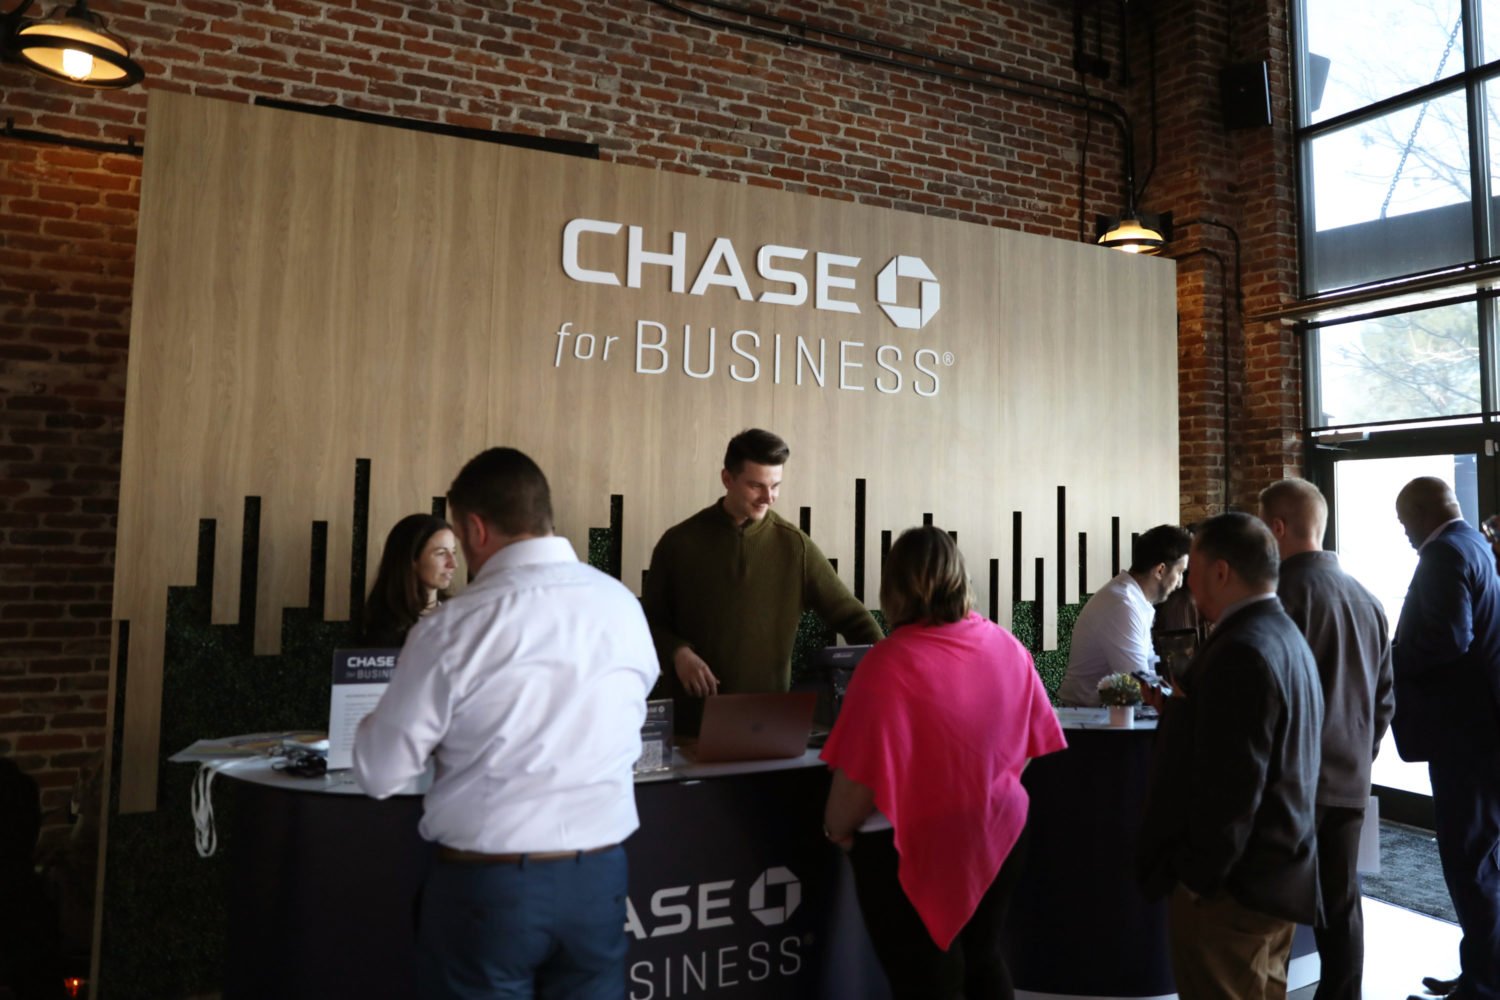 Chase to Bring ‘The Experience’ to D.C. Business Owners on May 8